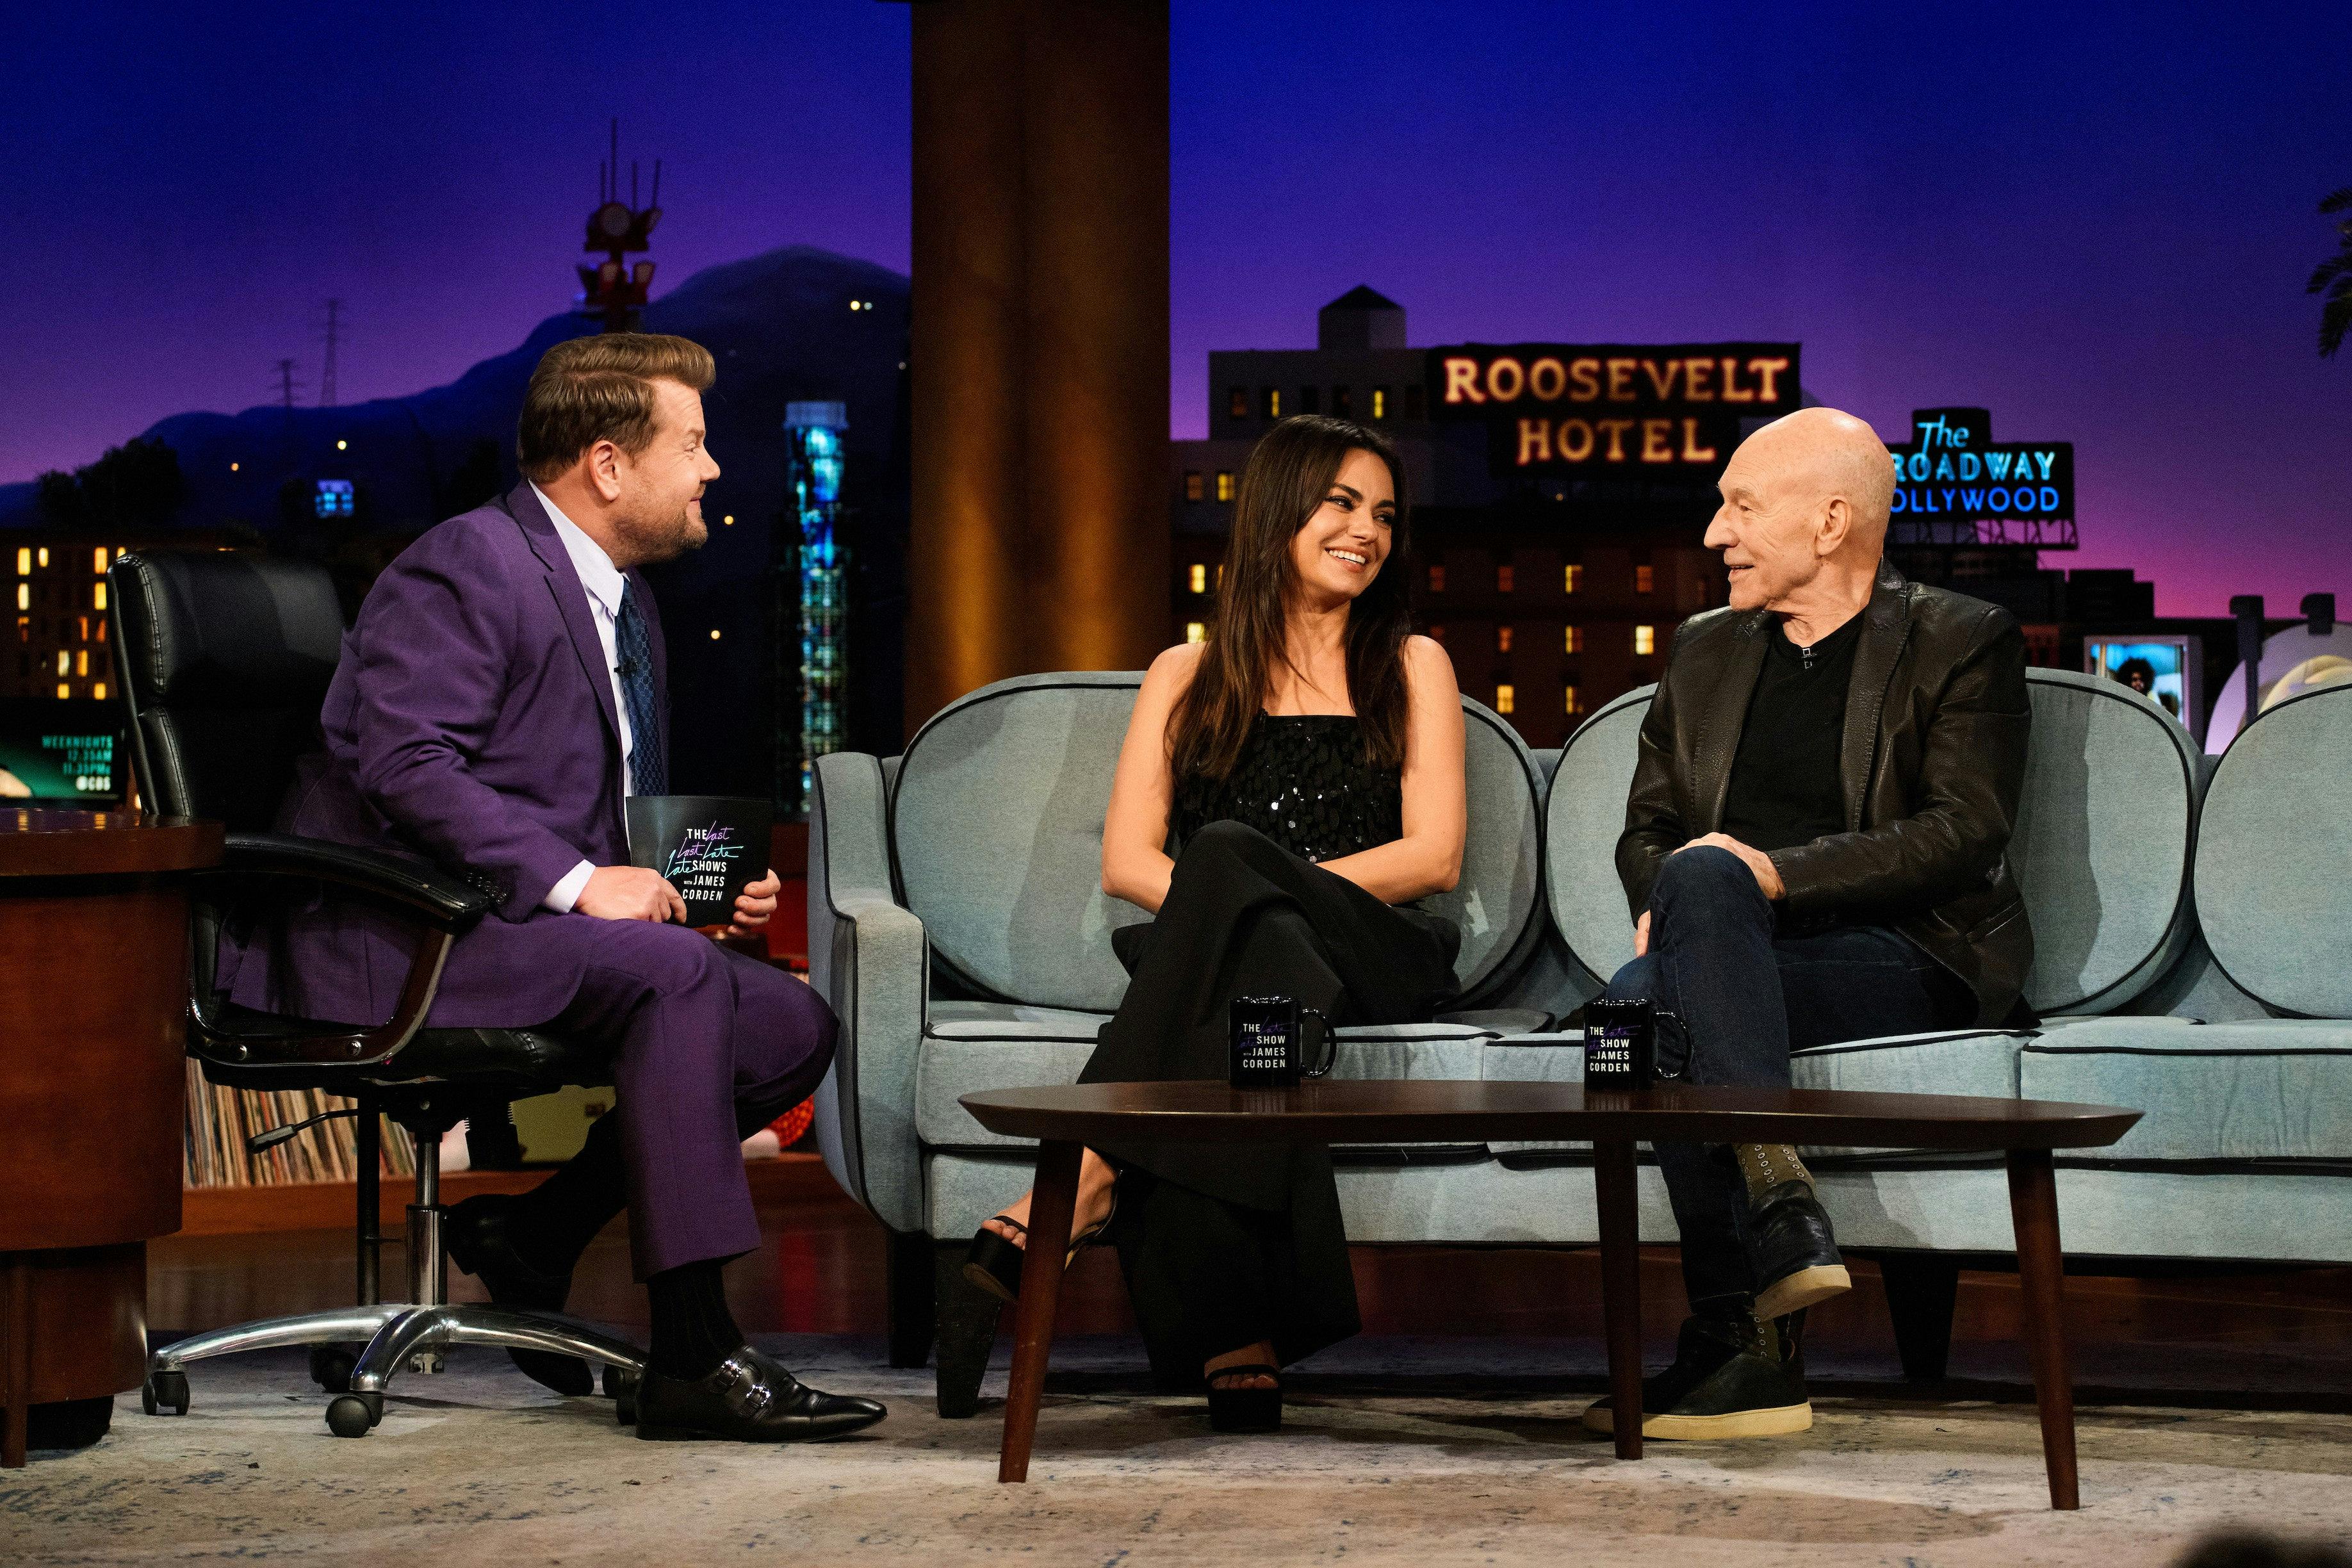 Patrick Stewart at The Late Late Show with James Corden with actress Mila Kunis